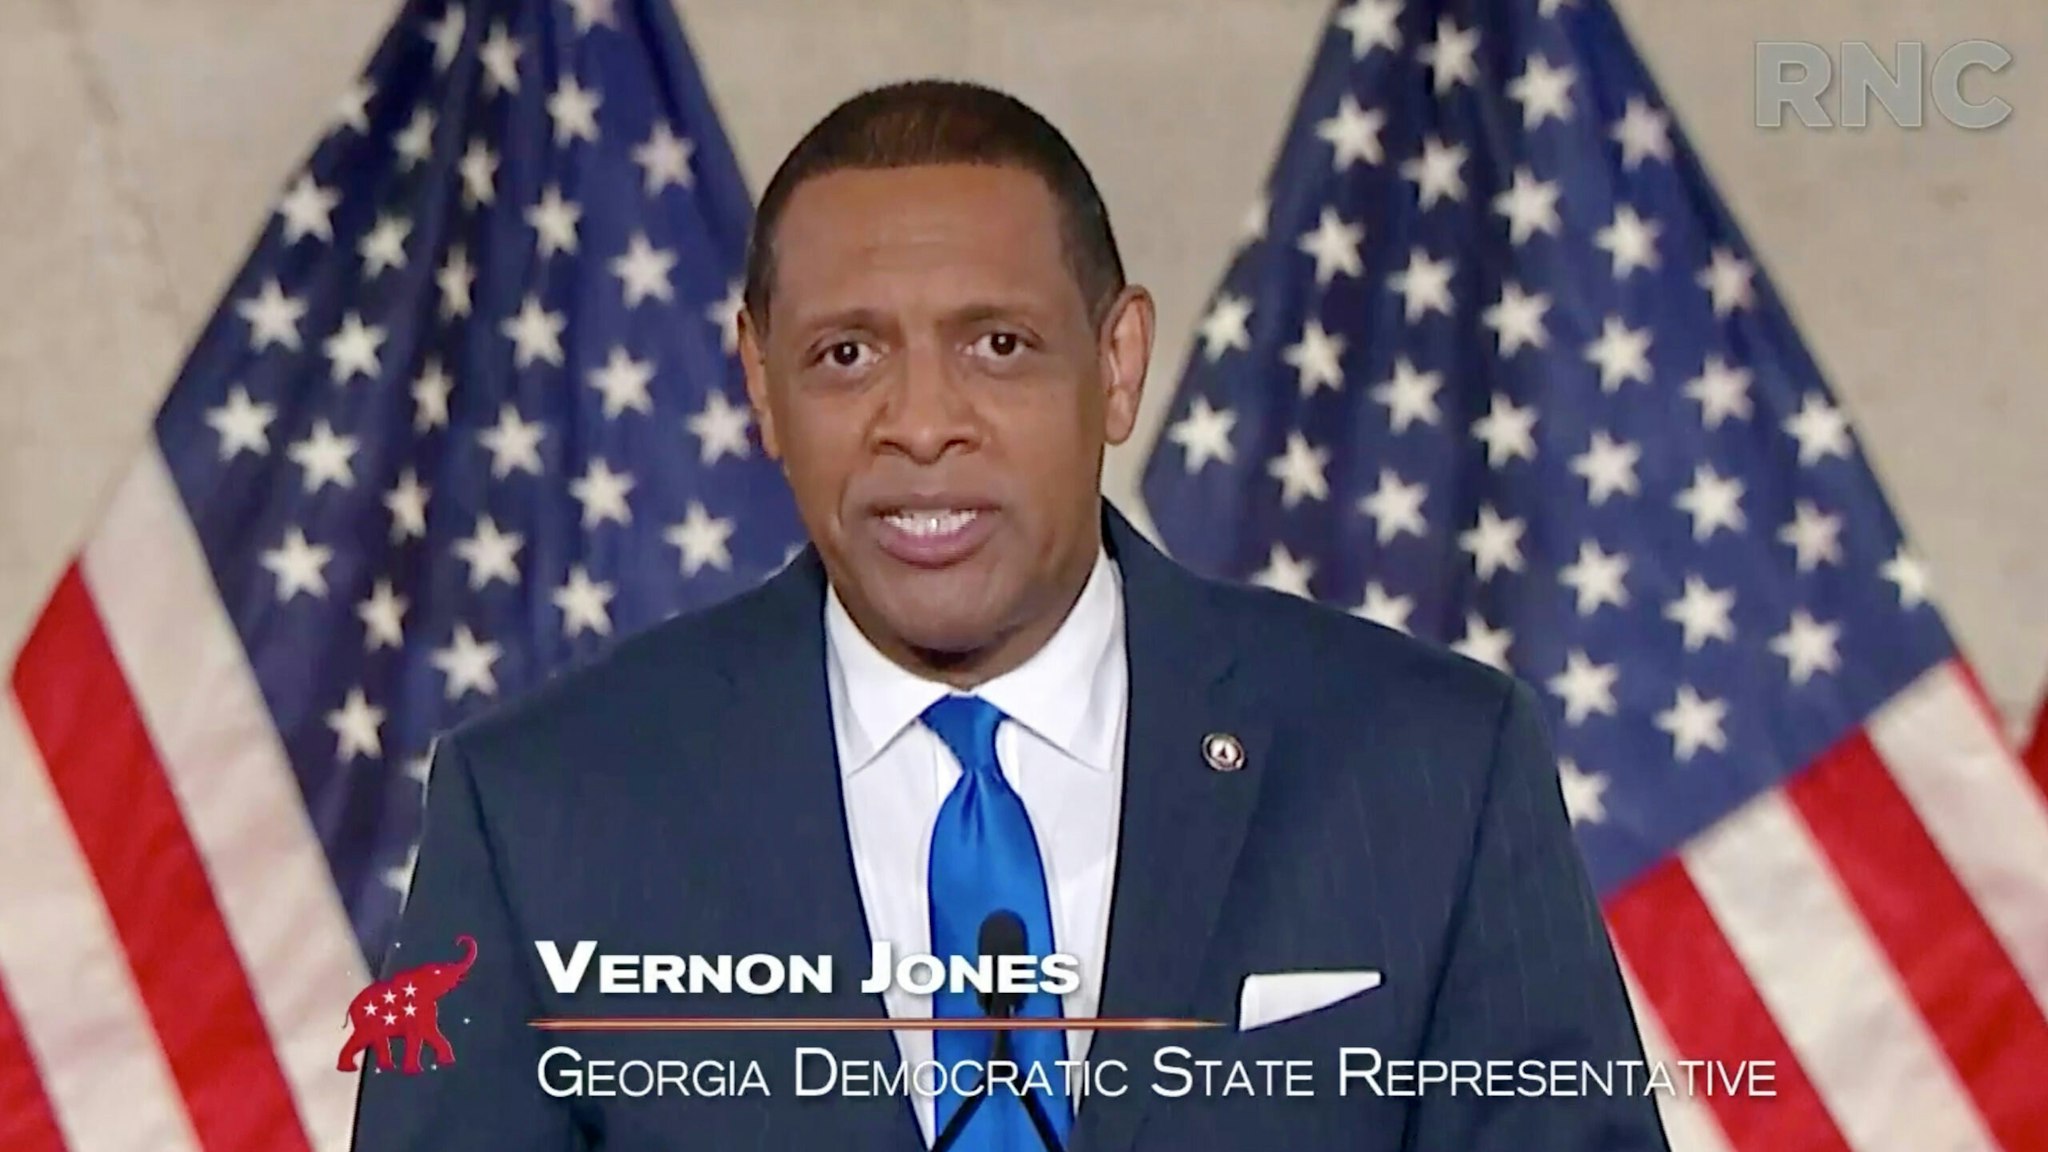 CHARLOTTE, NC - AUGUST 24: (EDITORIAL USE ONLY) In this screenshot from the RNC’s livestream of the 2020 Republican National Convention, U.S. Rep. Vernon Jones (D-GA) addresses the virtual convention on August 24, 2020. The convention is being held virtually due to the coronavirus pandemic but will include speeches from various locations including Charlotte, North Carolina and Washington, DC.